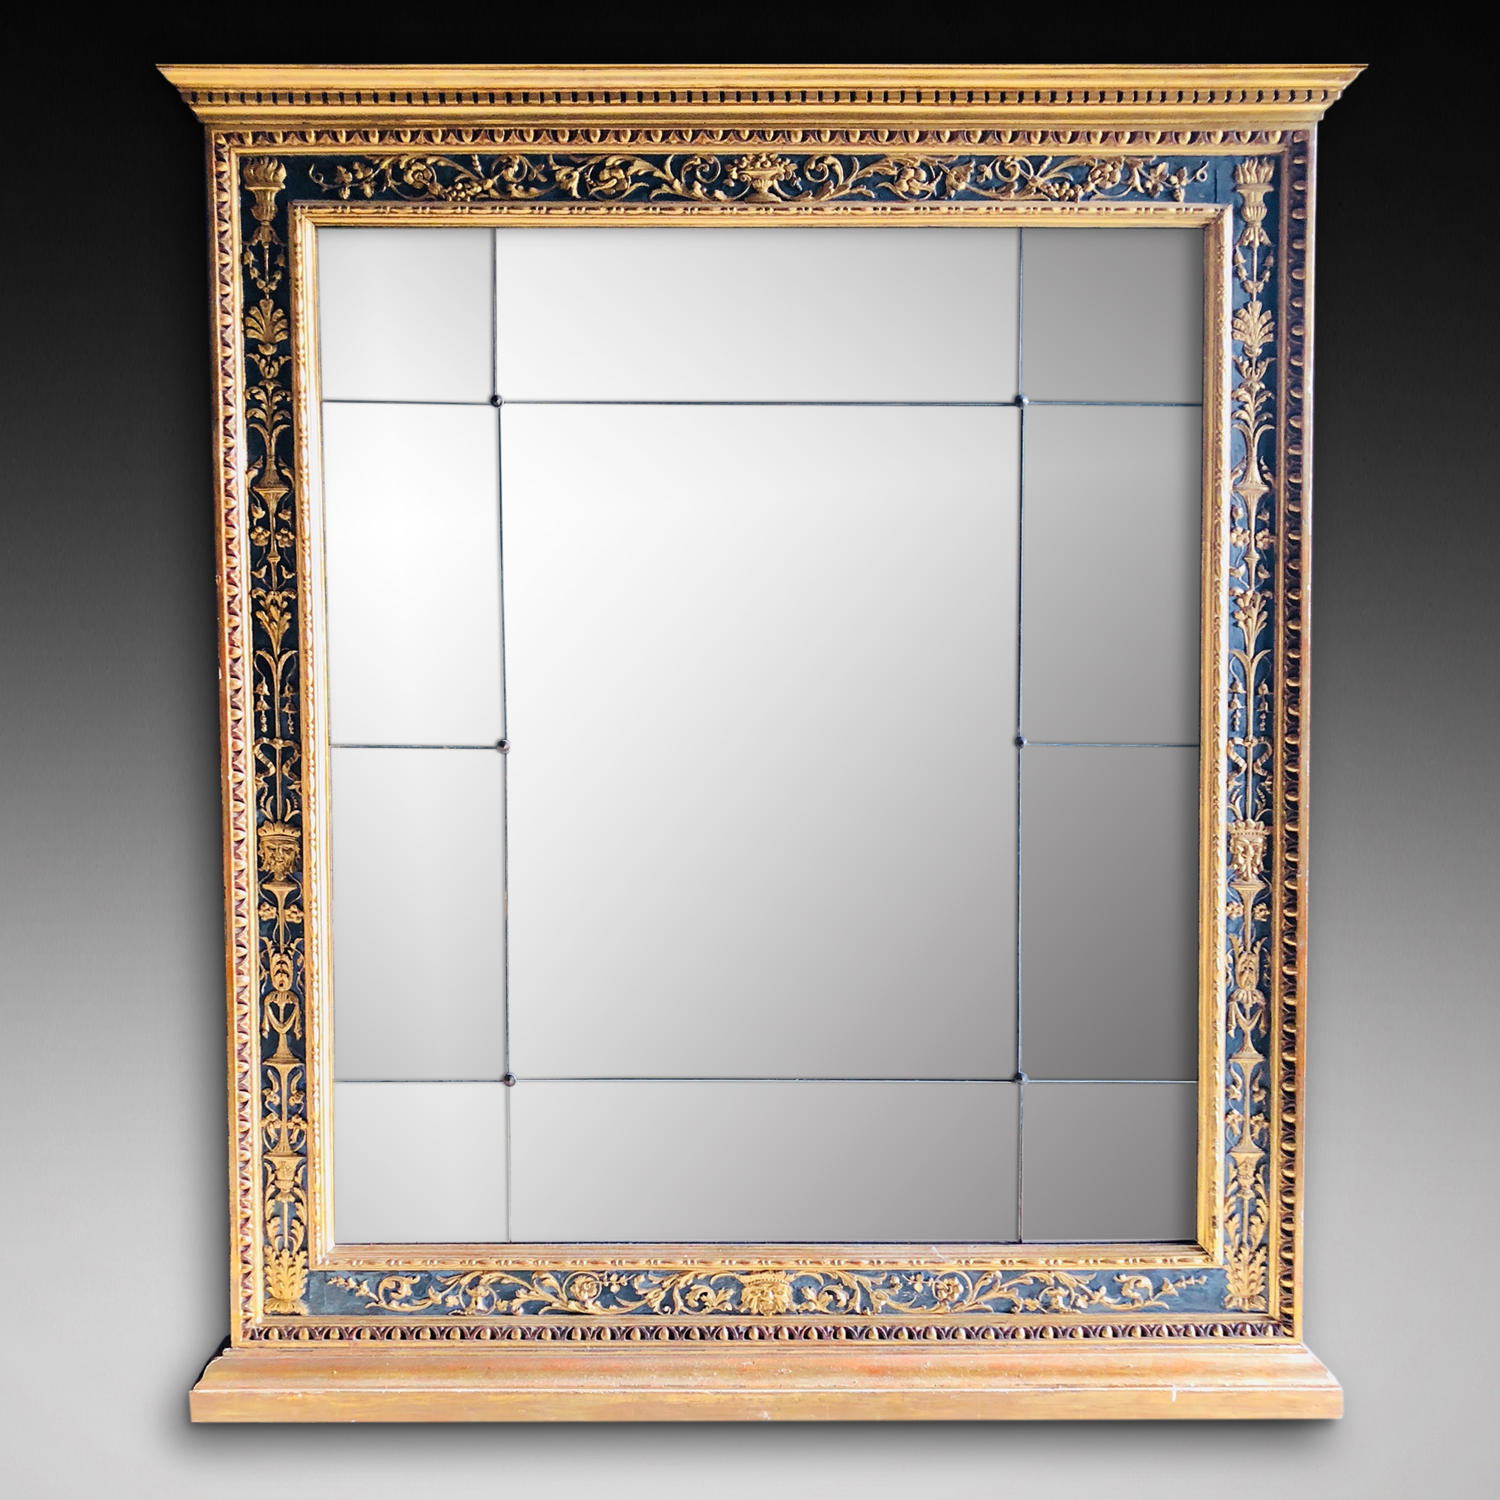 AN IMPORTANT OVERMANTLE MIRROR IN THE RENAISSANCE MANNER